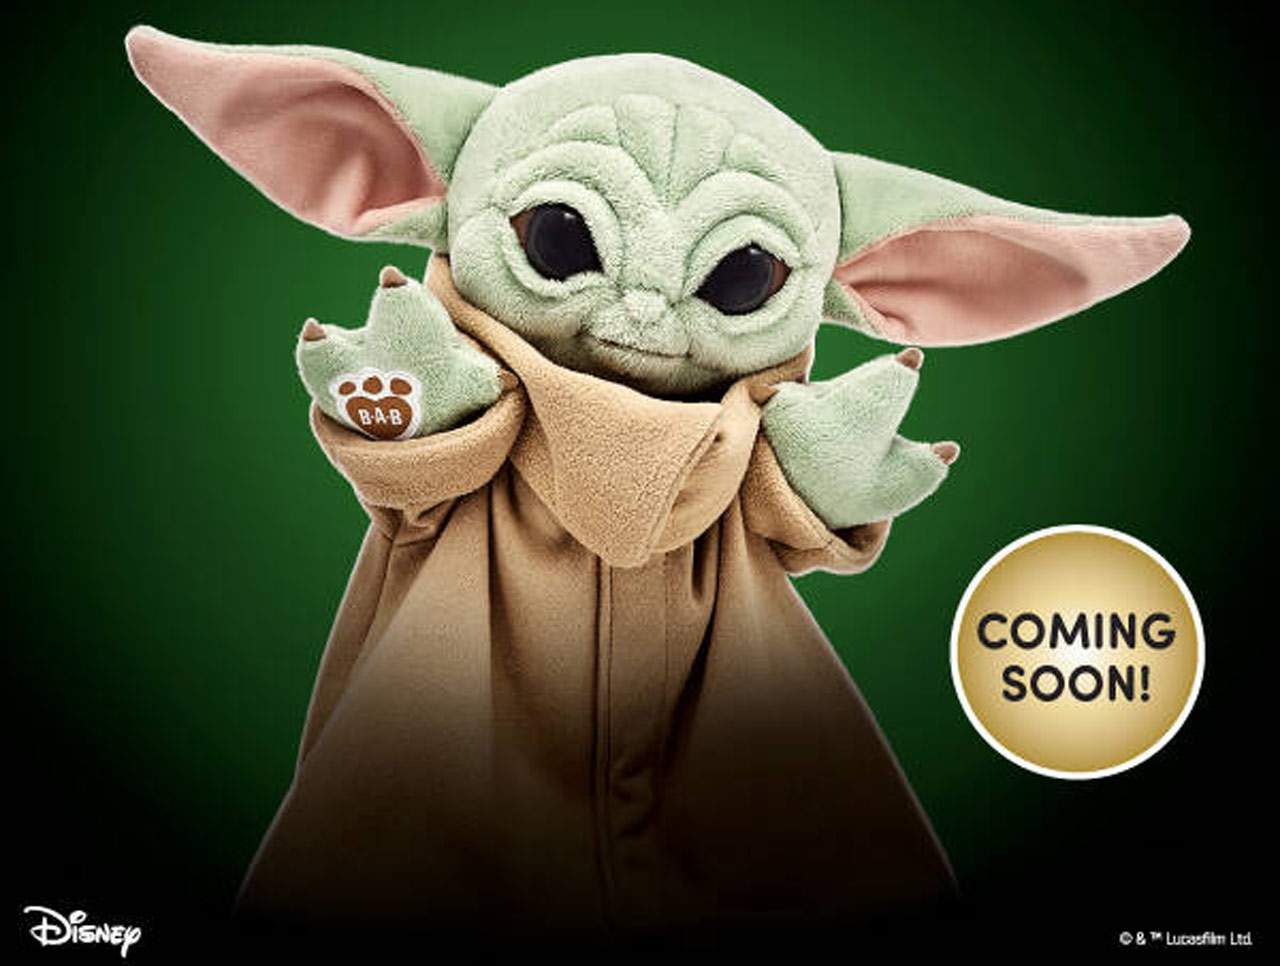 Build-A-Bear reveals Baby Yoda stuffed animal set to arrive in stores ‘soon’